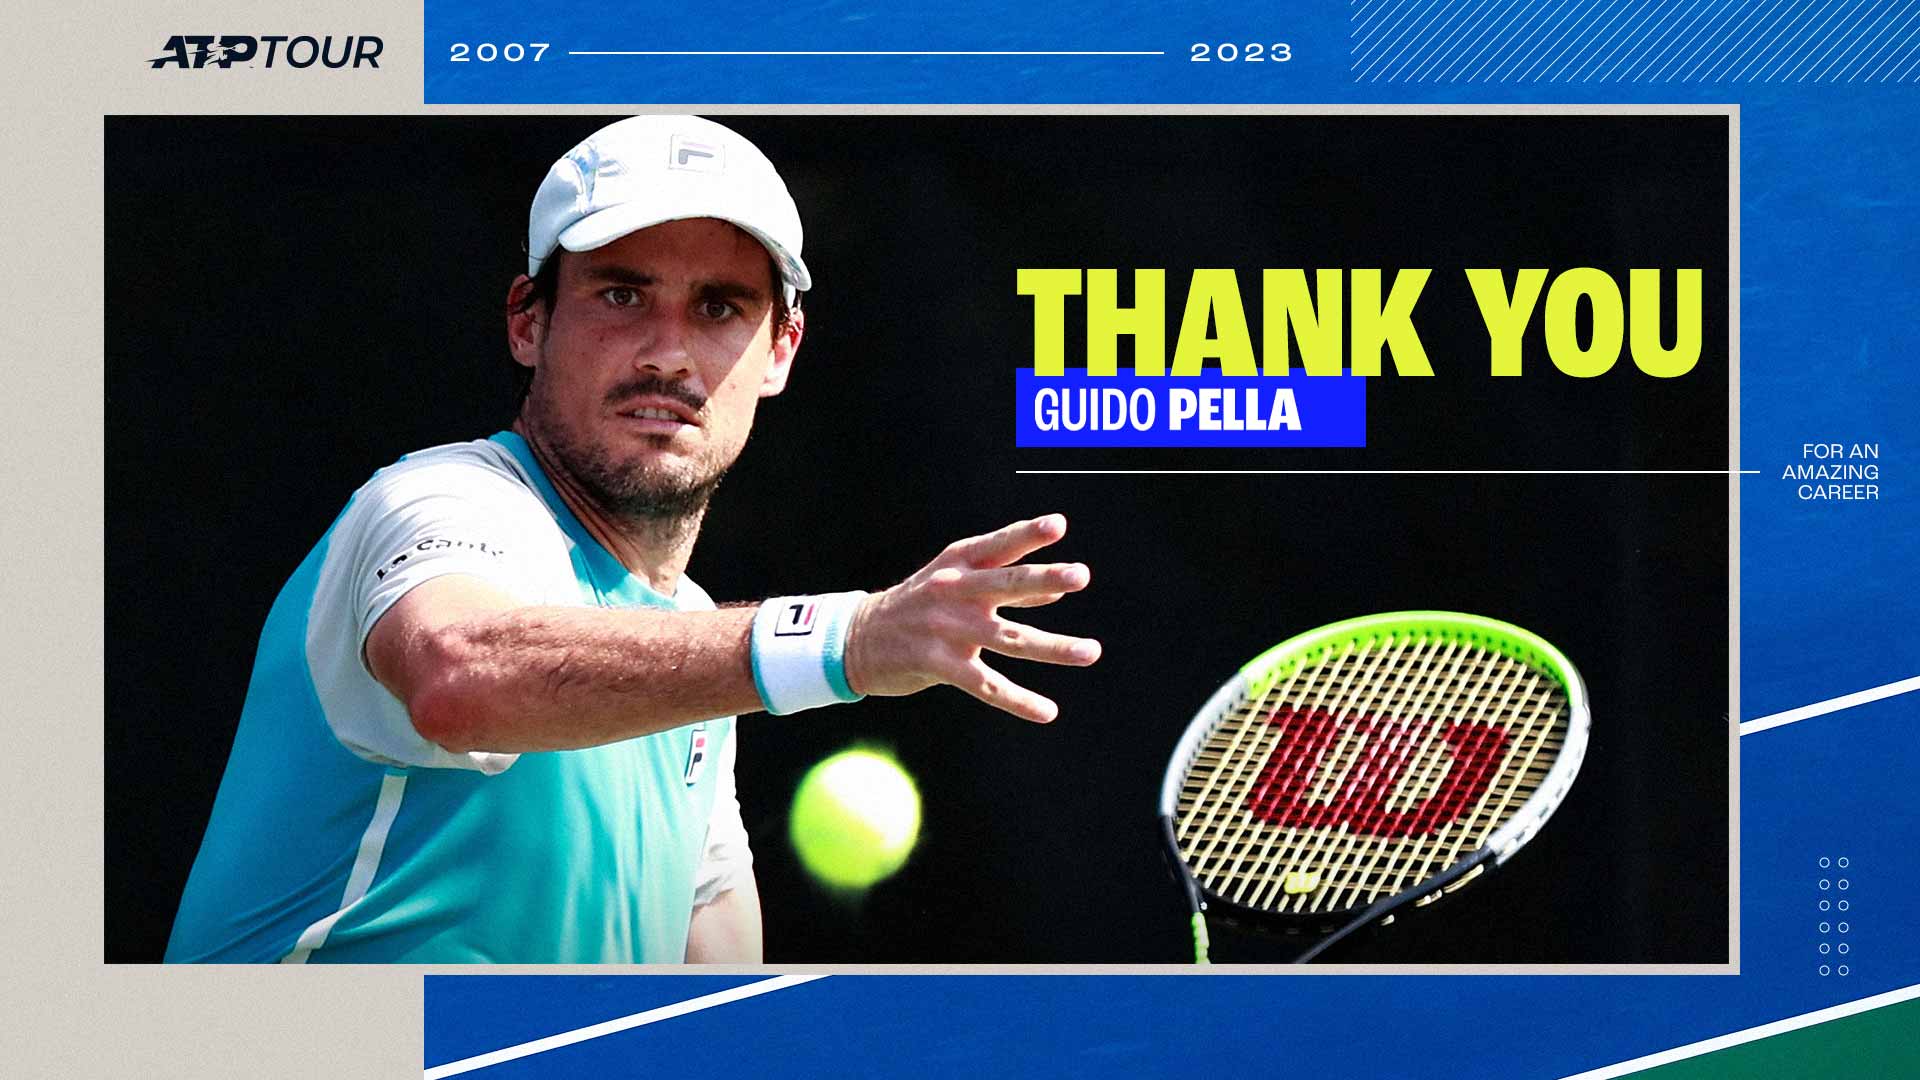 Guido Pella climbed as high as No. 20 in the Pepperstone ATP Rankings.